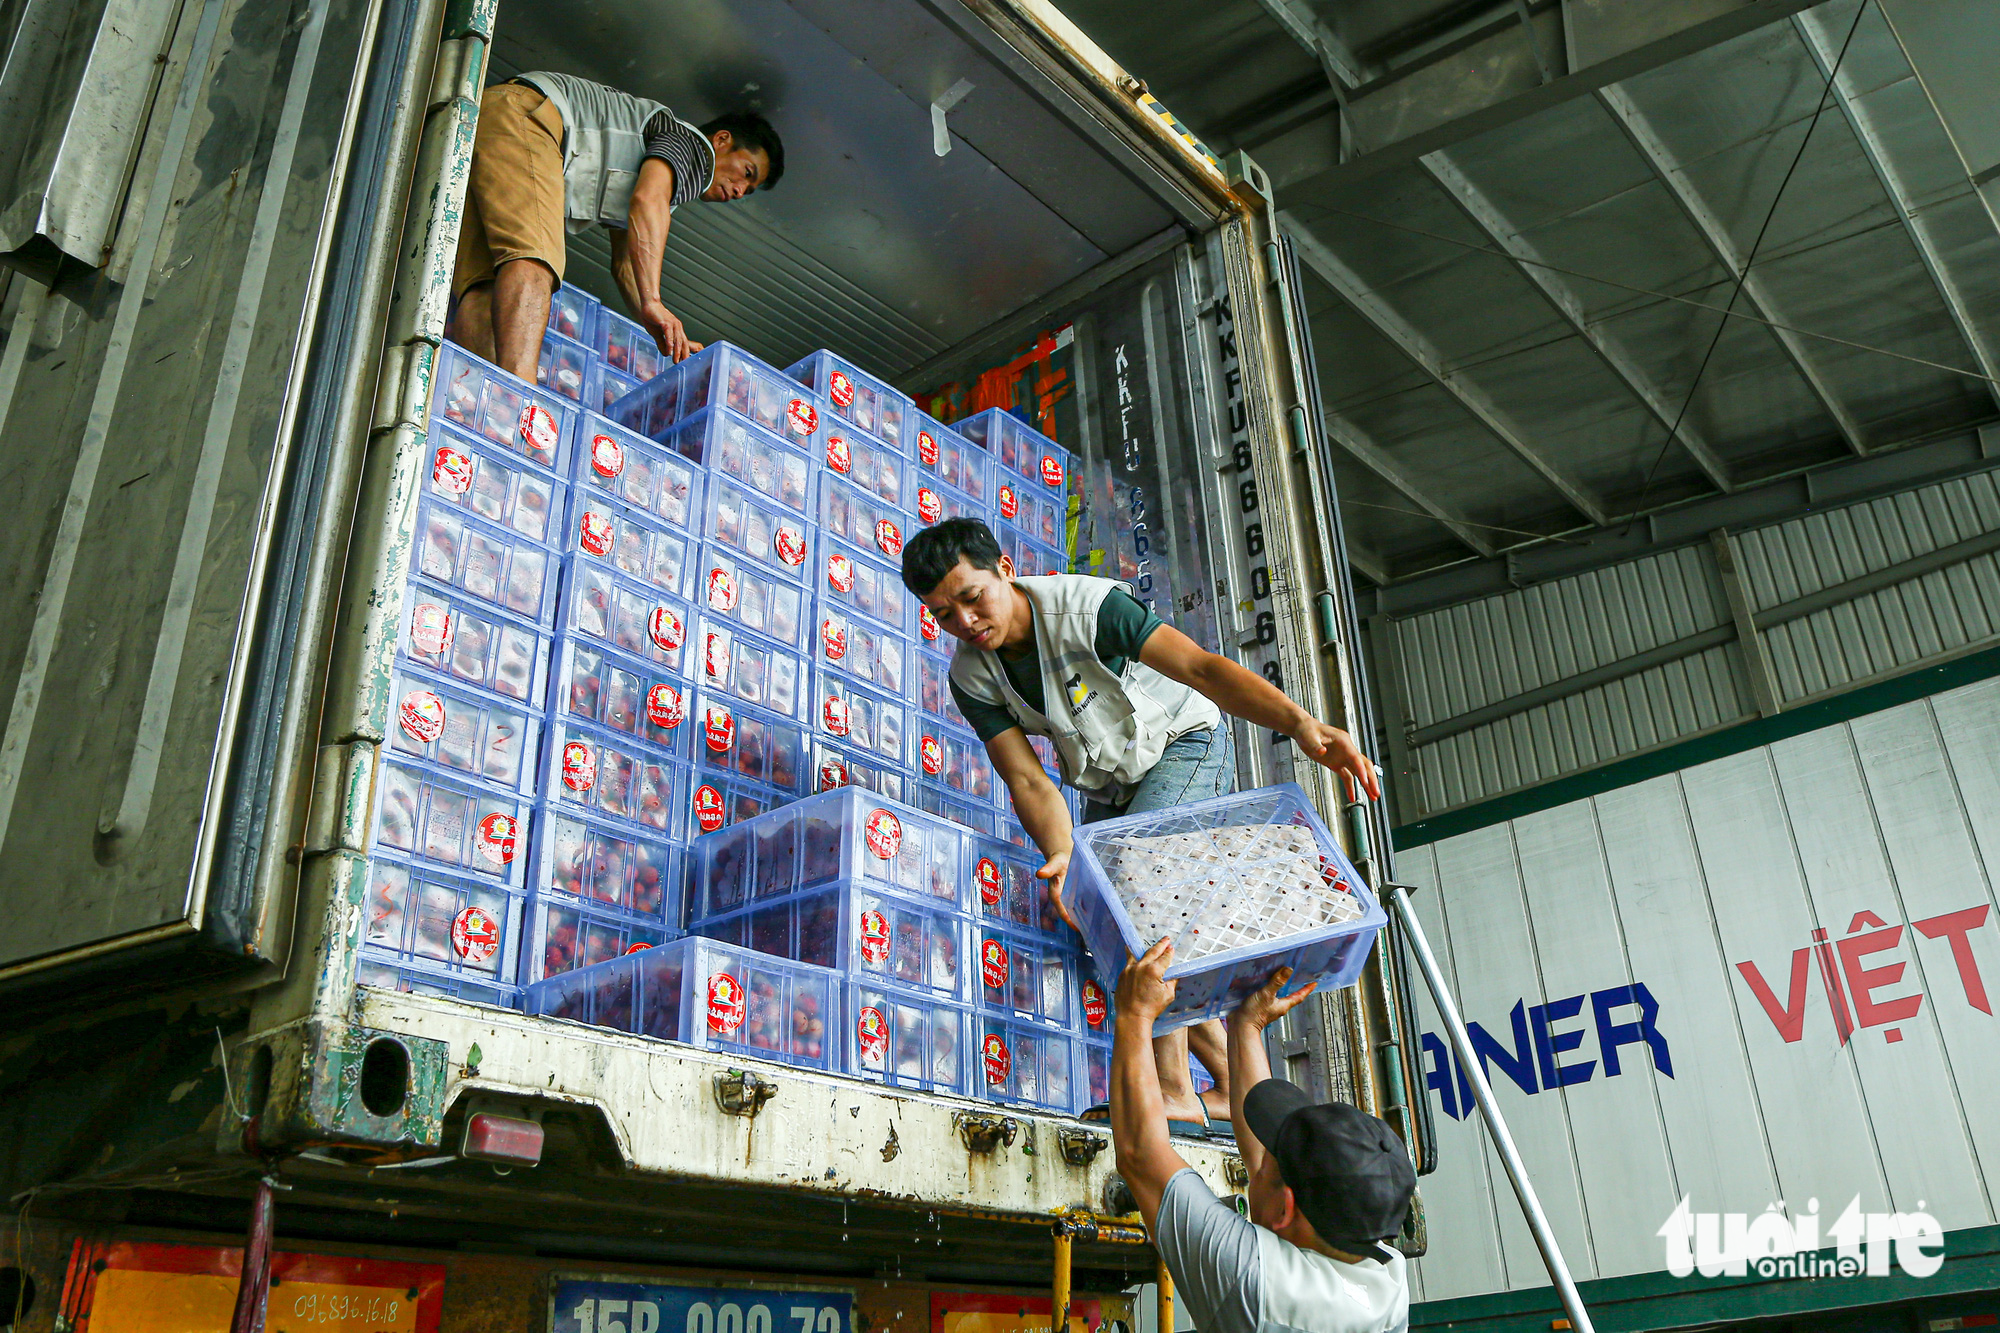 Workers load boxes of lychees onto a container truck at a warehouse in the Tan Thanh border gate area. Photo: Ha Quan / Tuoi Tre